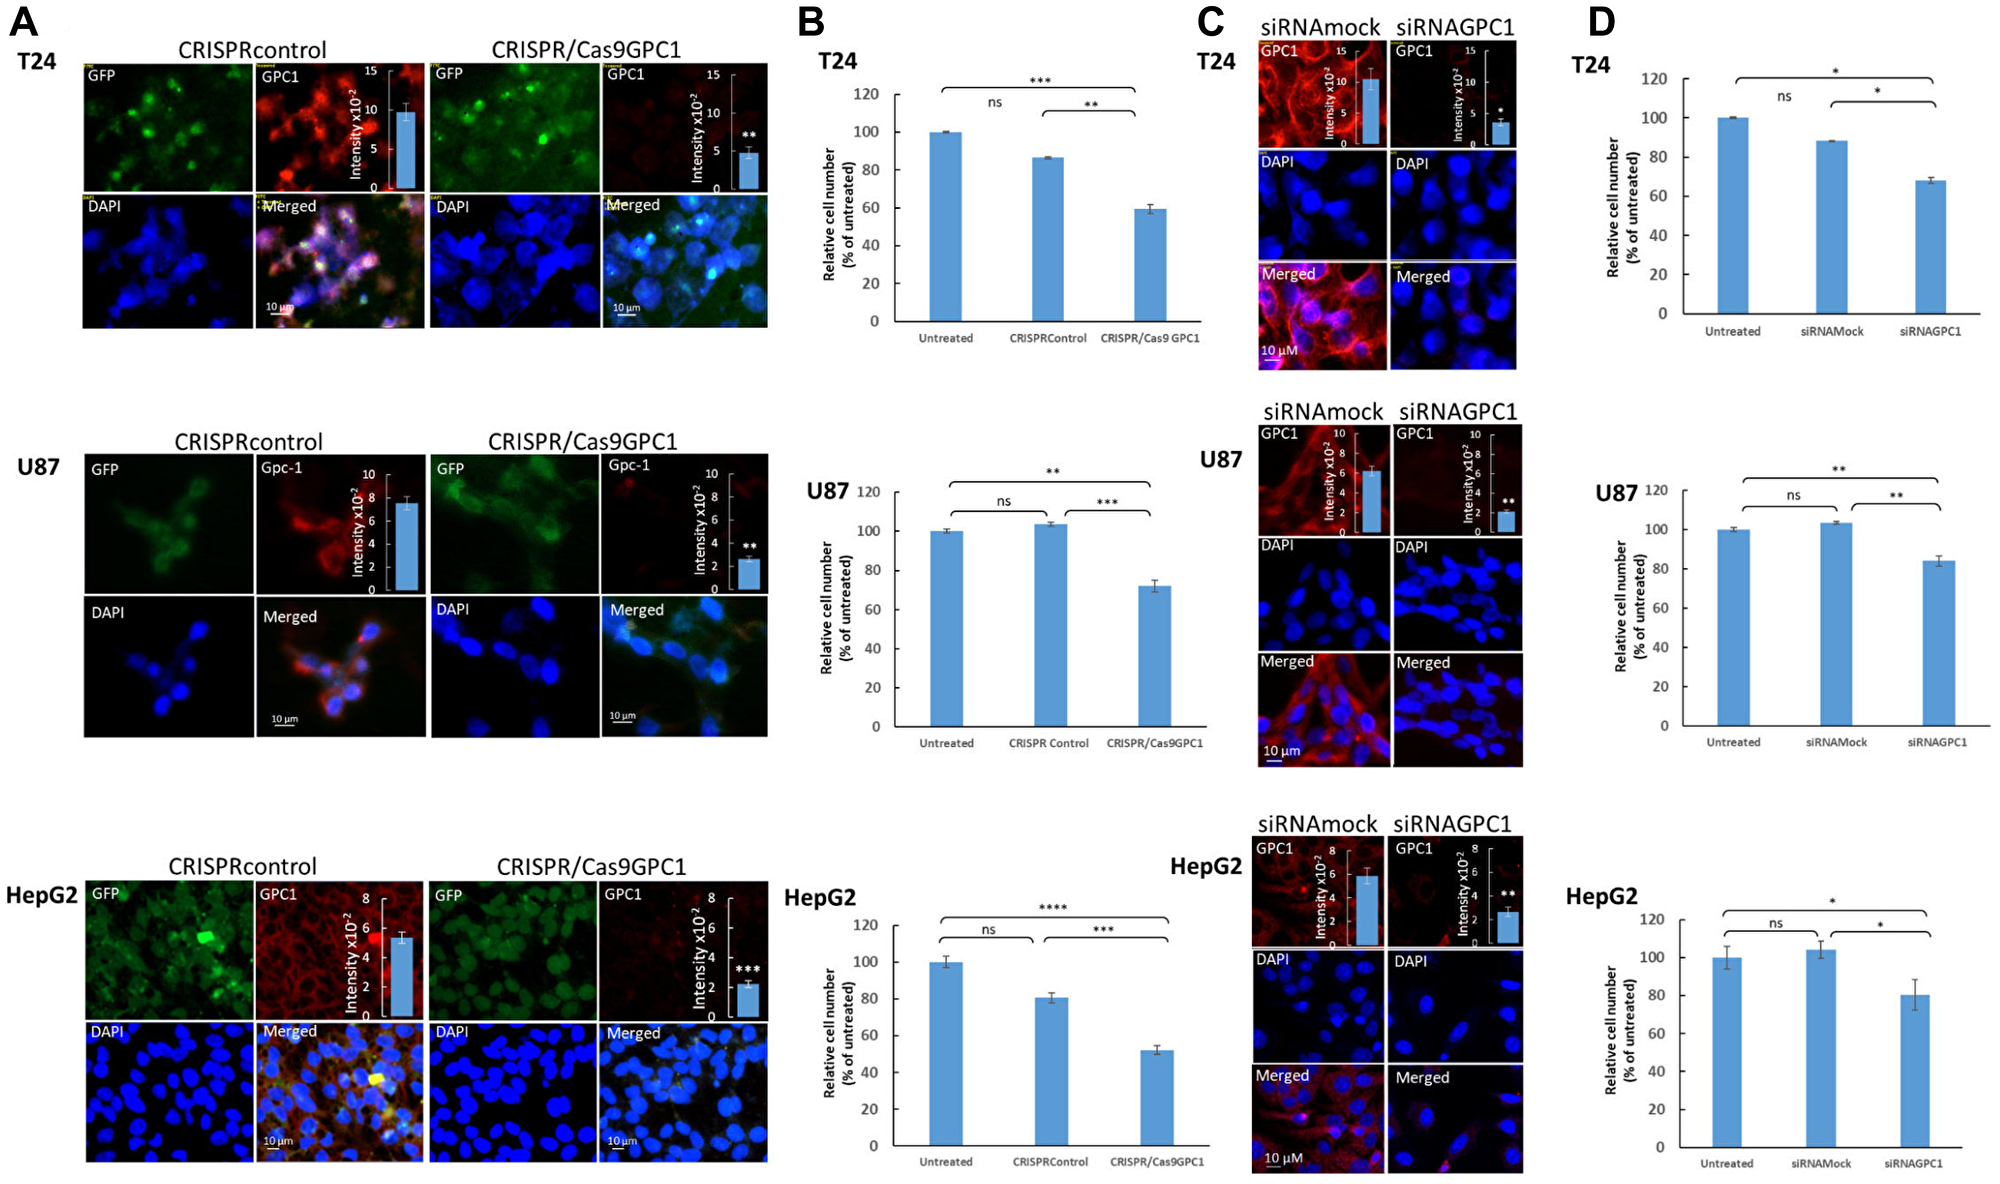 Suppression of GPC1 expression attenuates proliferation of T24, U87 and HepG2 cells.